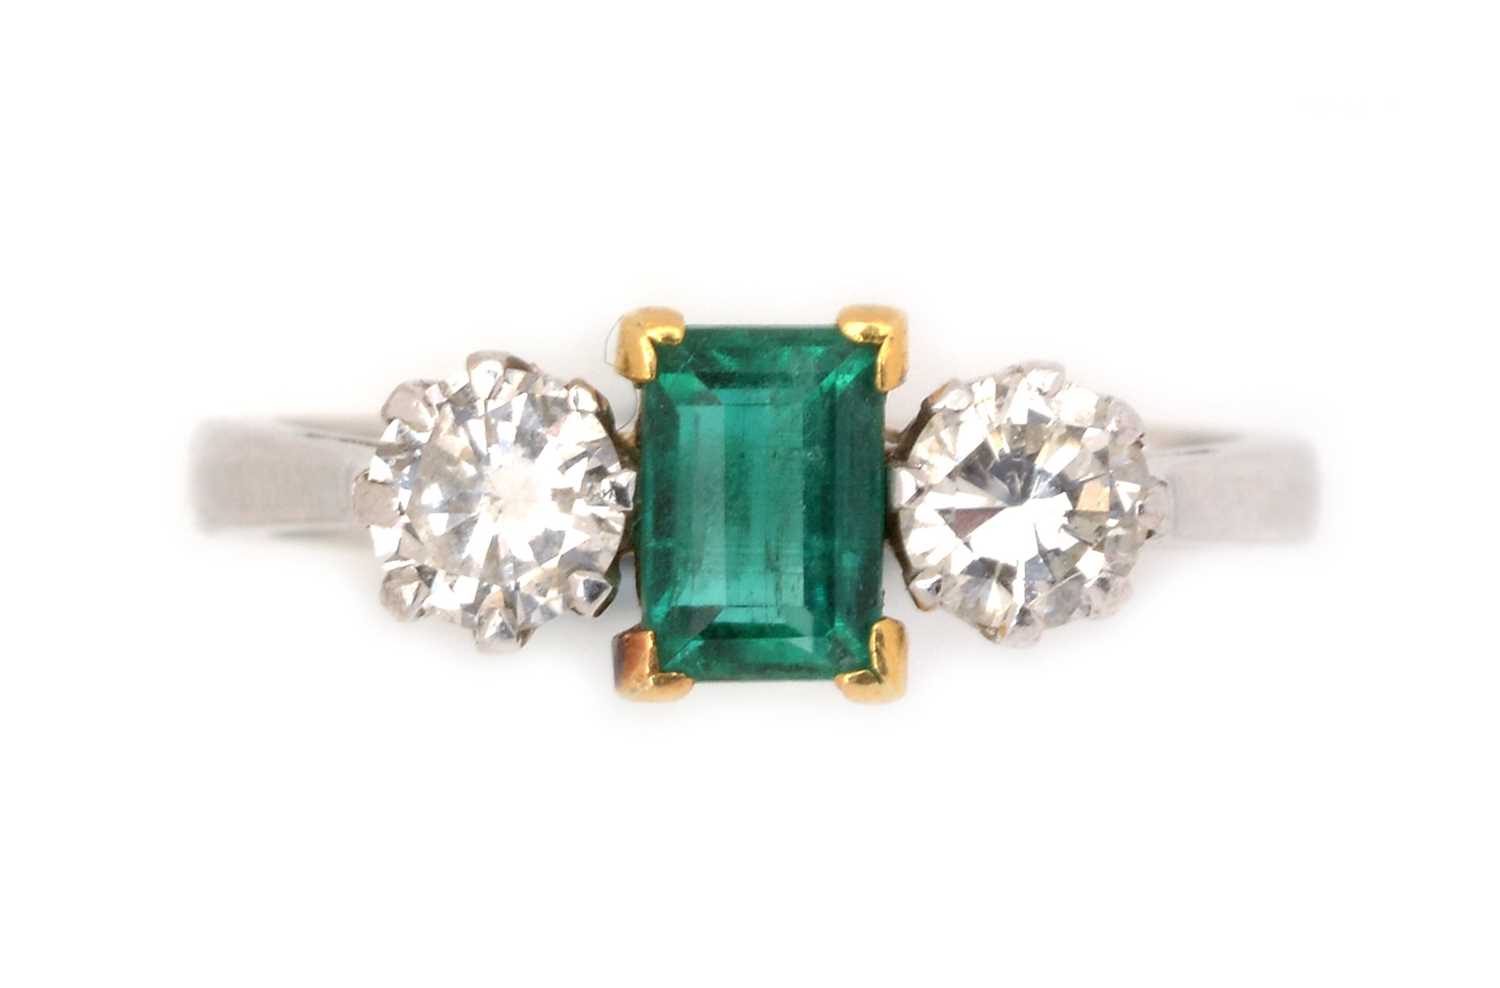 Lot 52 - An emerald and diamond ring